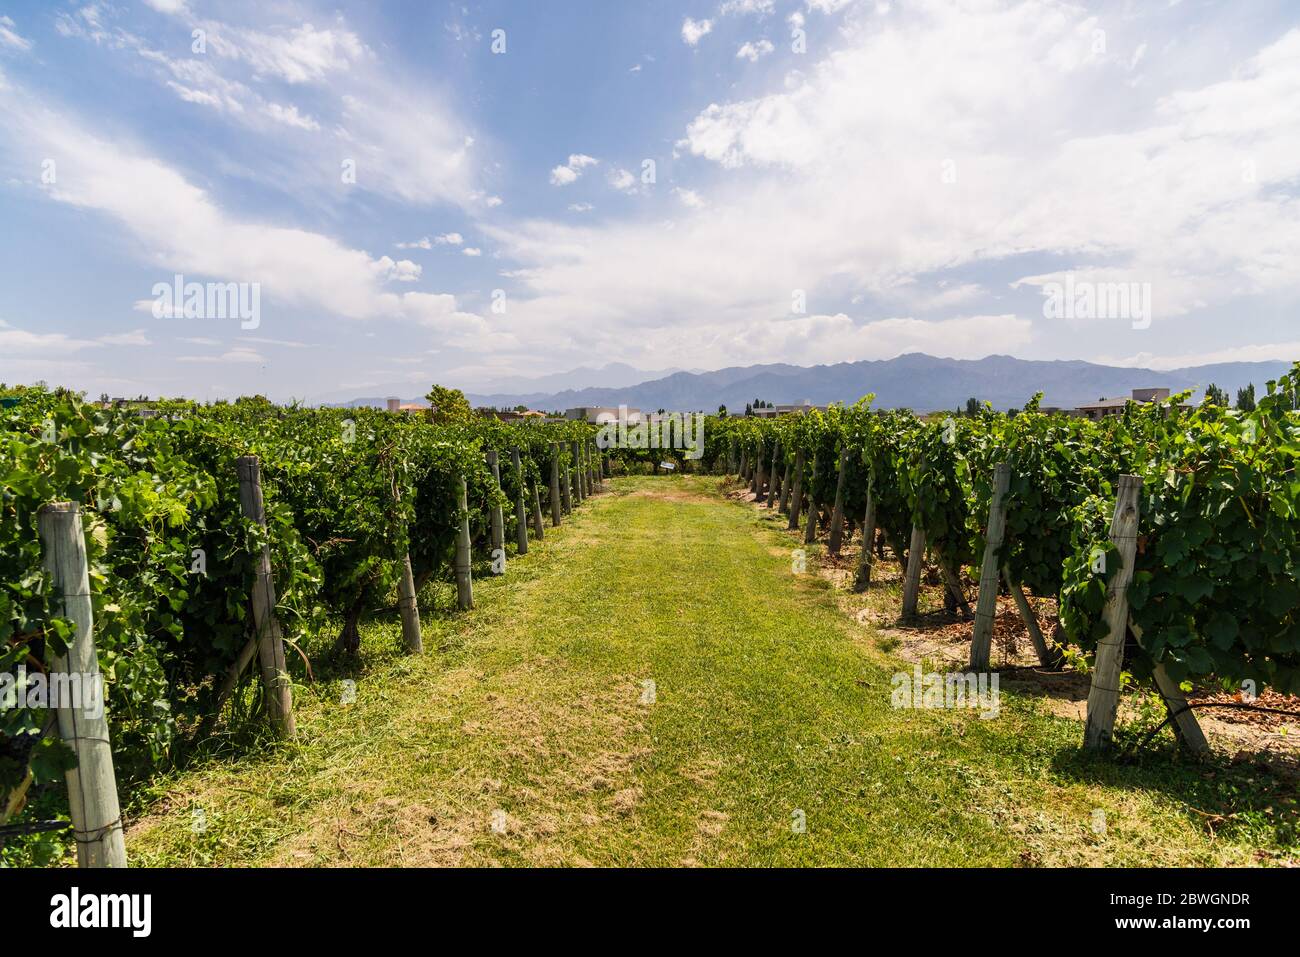 Vine plants in a vineyard in Mendoza on a sunny day with blue sky. Stock Photo